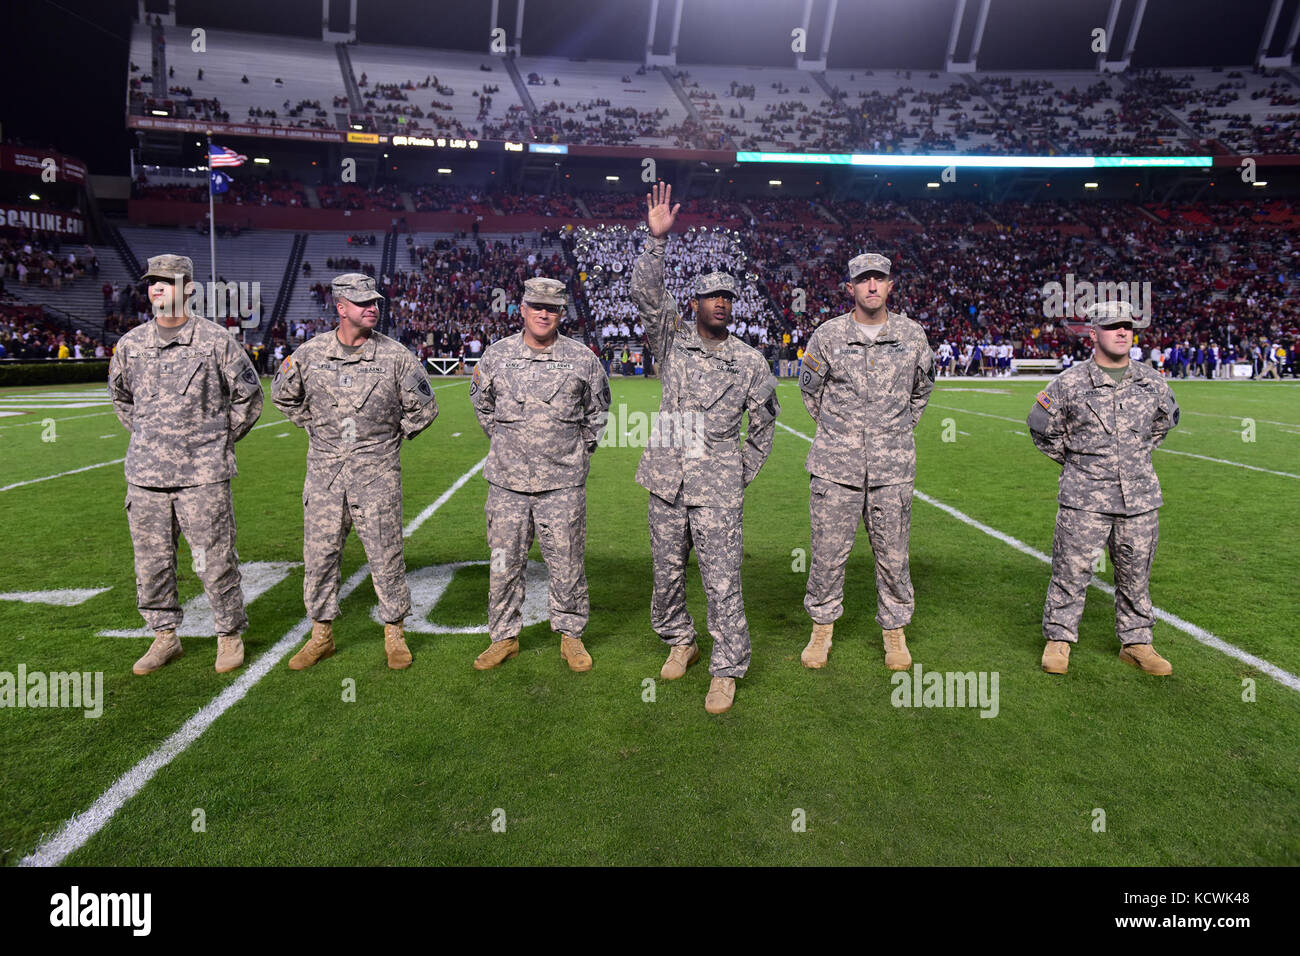 U.S. Army Chief Warrant Officer 2 Guion Gregory, South Carolina National Guard, 1-151st Attack Reconnaissance Battalion UH-64 Apache pilot, receives a game ball at Williams-Brice stadium in Columbia, South Carolina, Nov. 19, 2016. The South Carolina Army National Guard conducted a fly-over in support of Fort Jackson's participation in the University of South Carolina's military appreciation game. (U.S. Air National Guard photo by Airman 1st Class Megan Floyd) Stock Photo